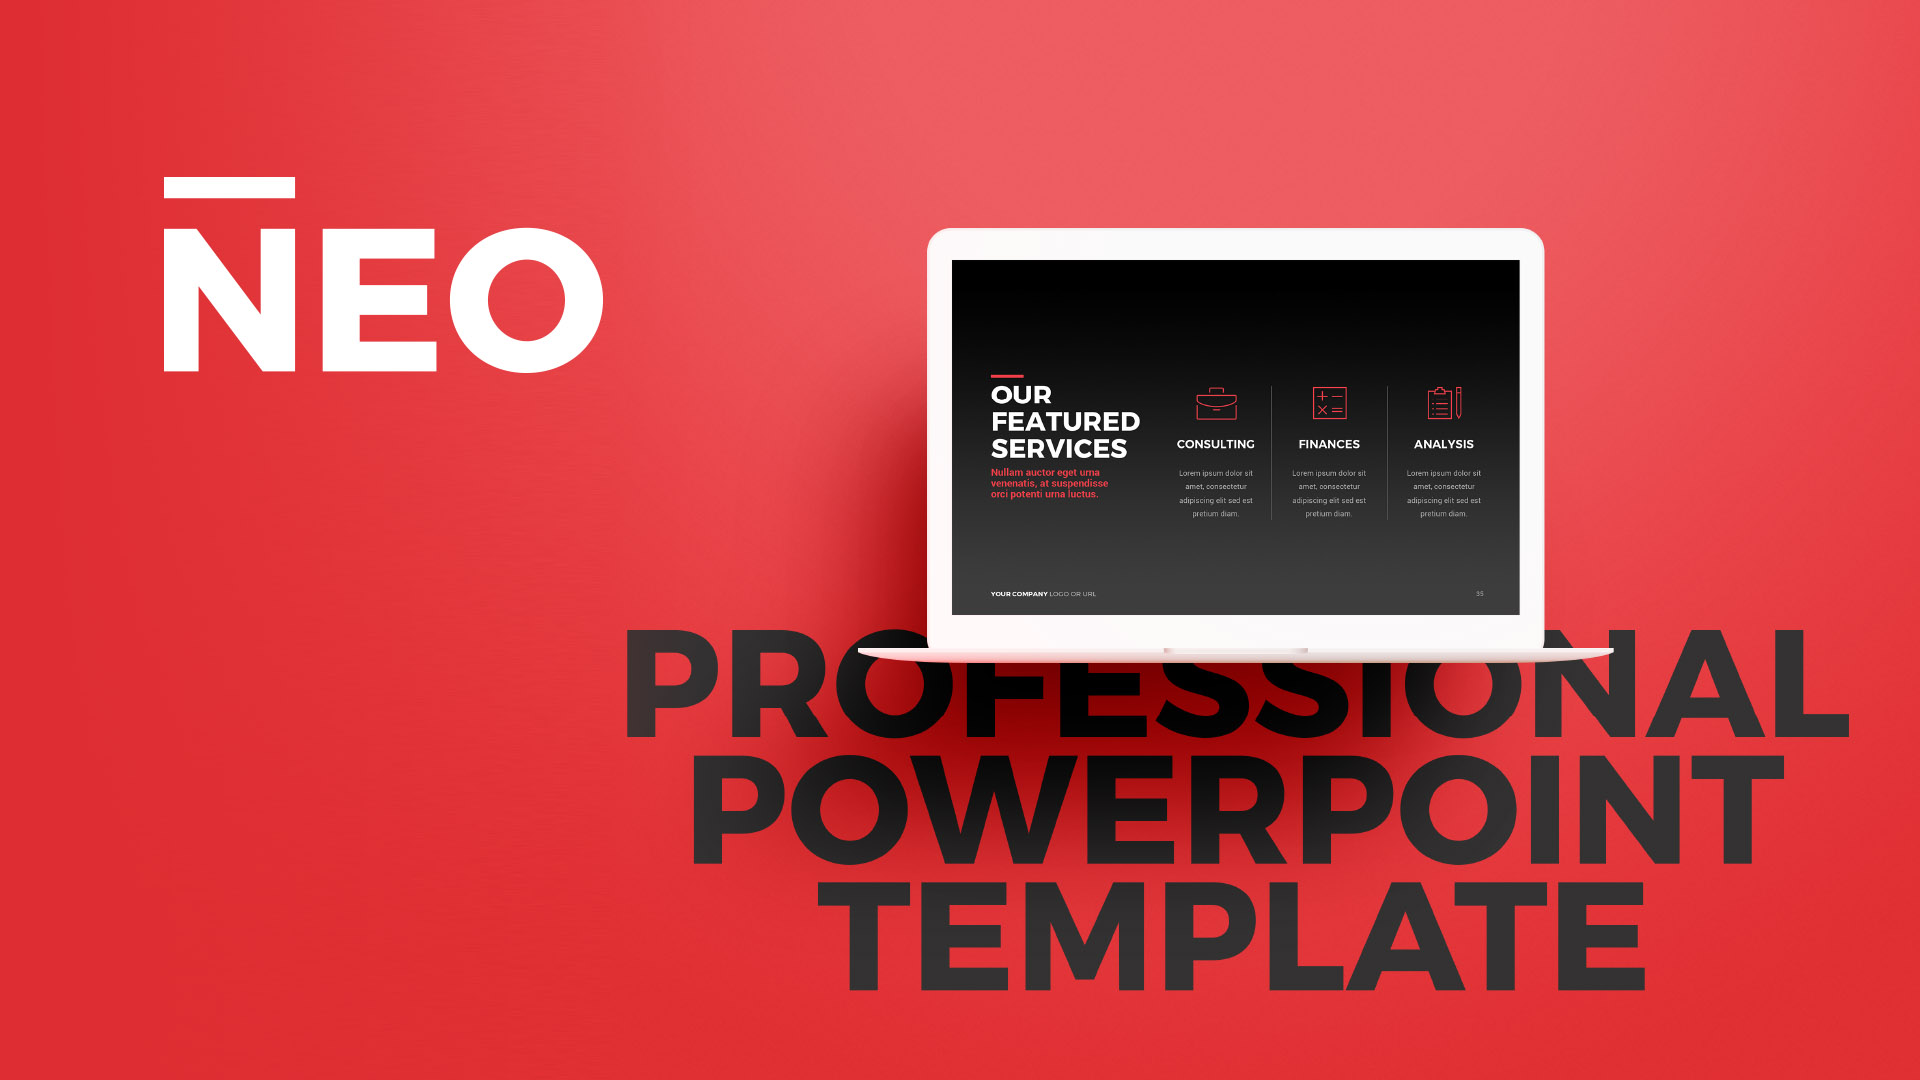 NEO Multipurpose Powerpoint Template By Interartivity GraphicRiver